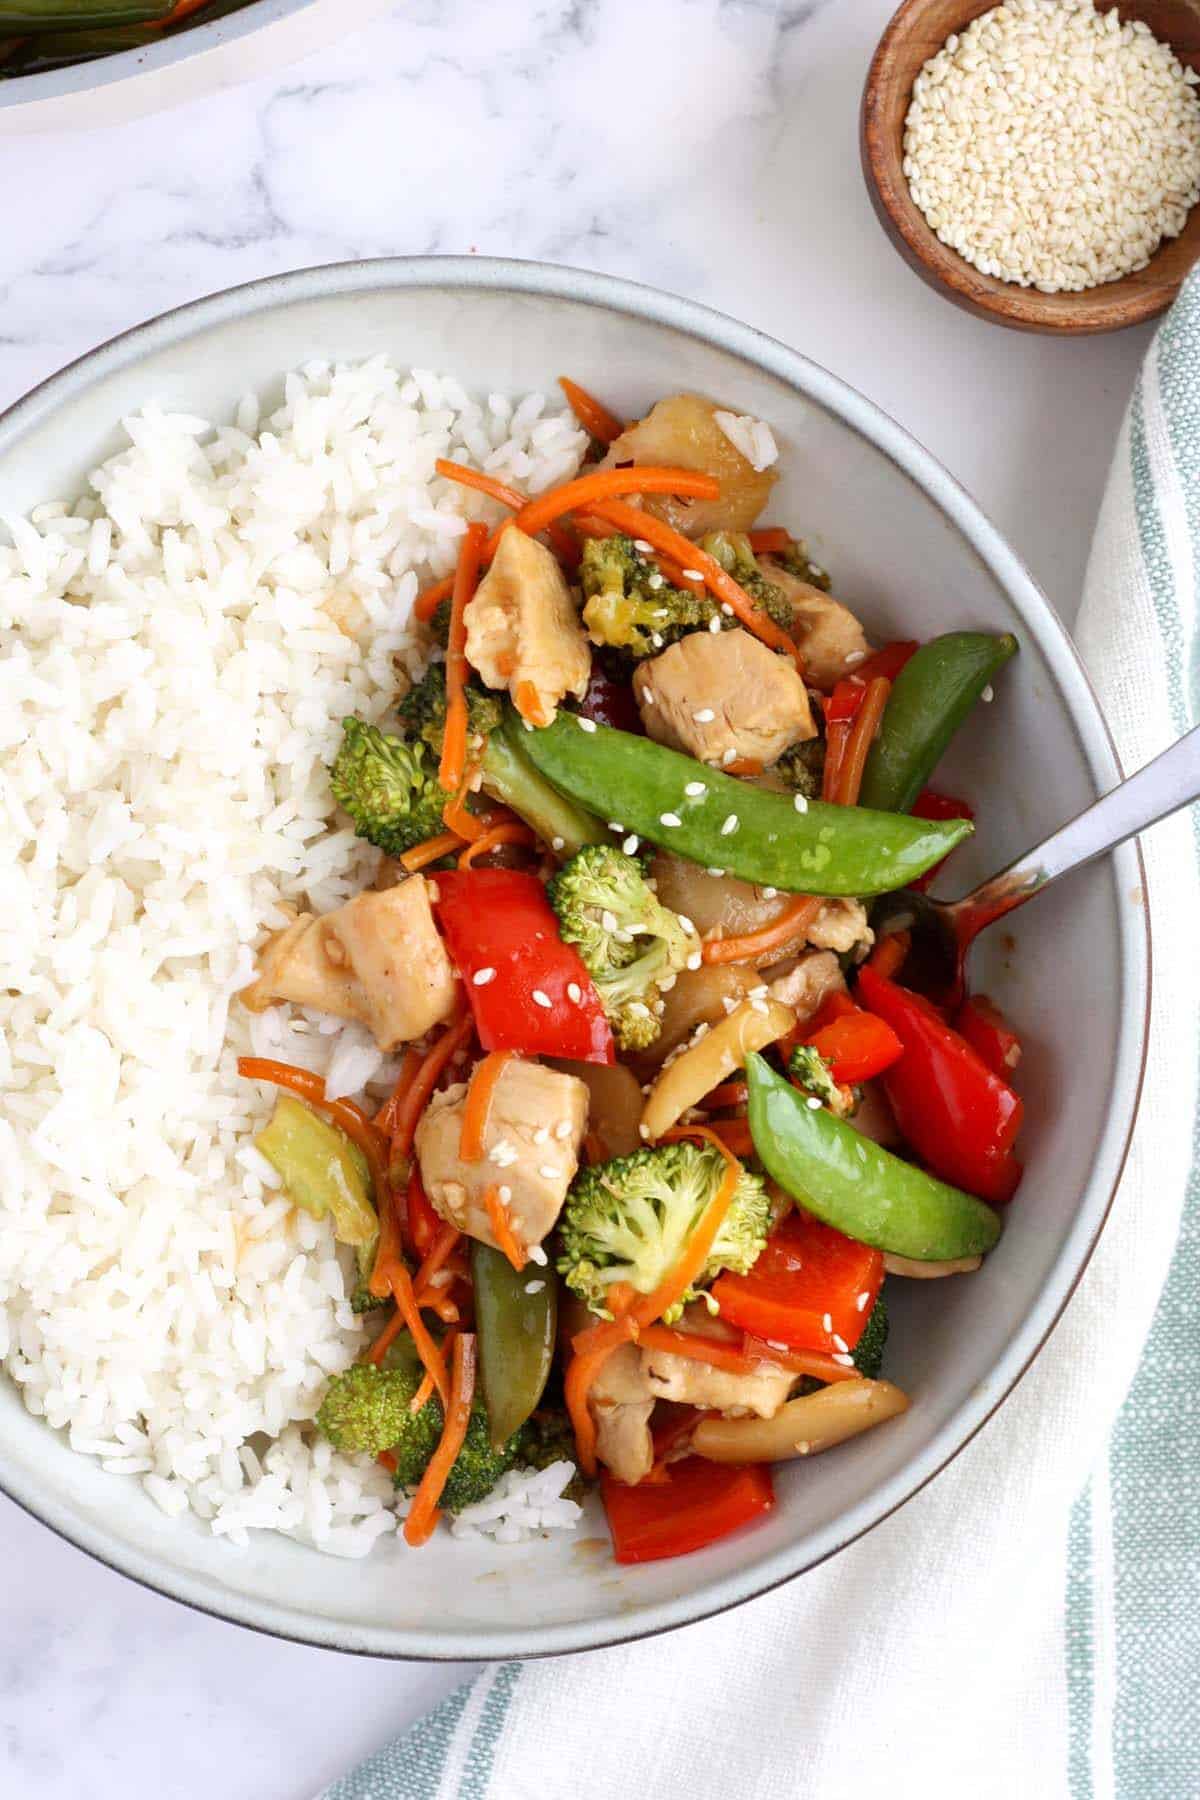 Stir-fried chicken with white rice and sesame seeds